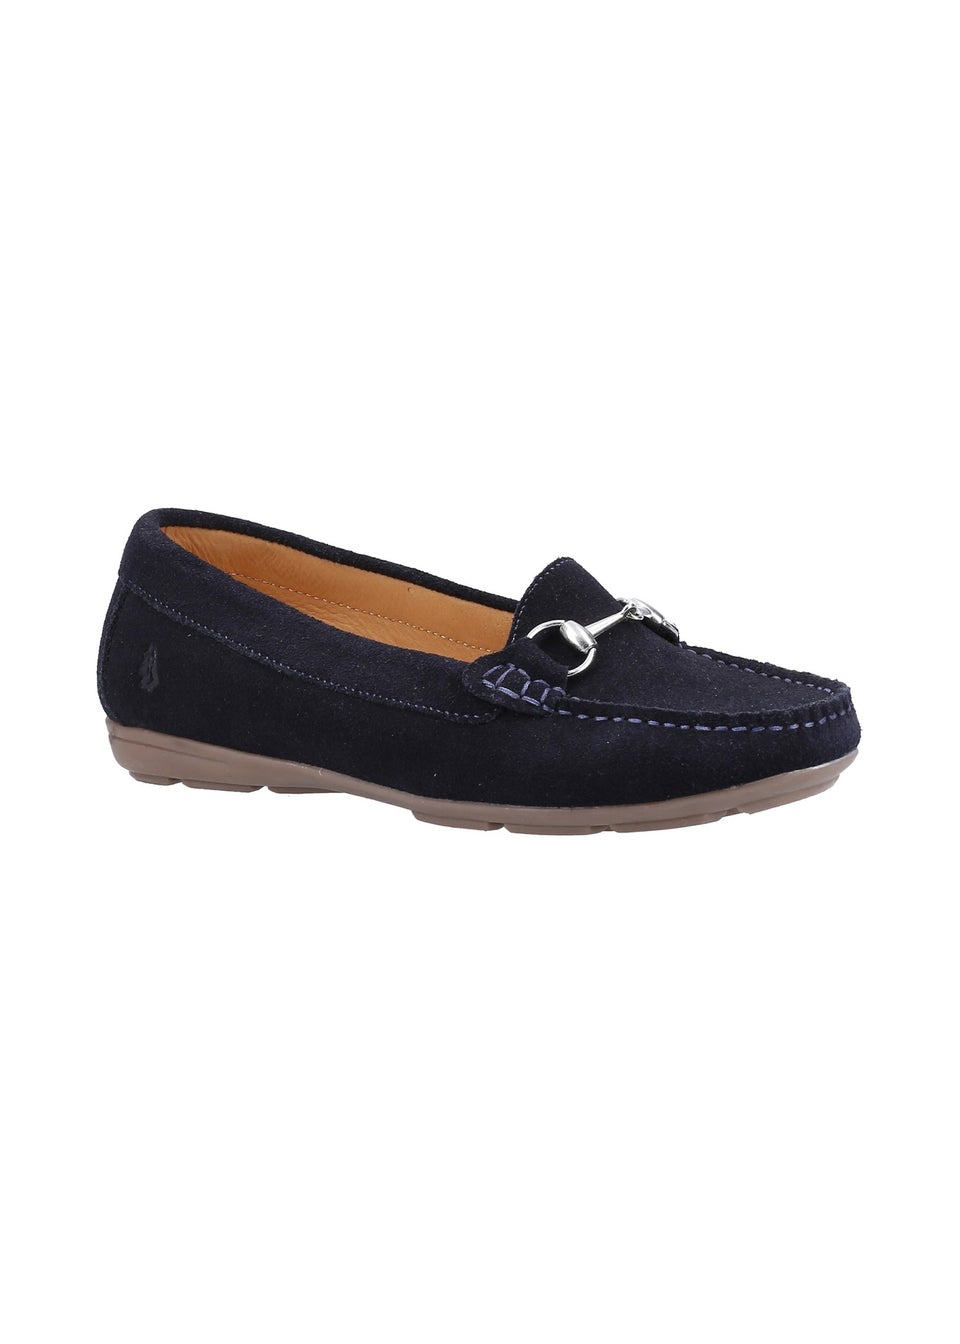 Hush Puppies Navy Molly Snaffle Suede Loafer Shoe